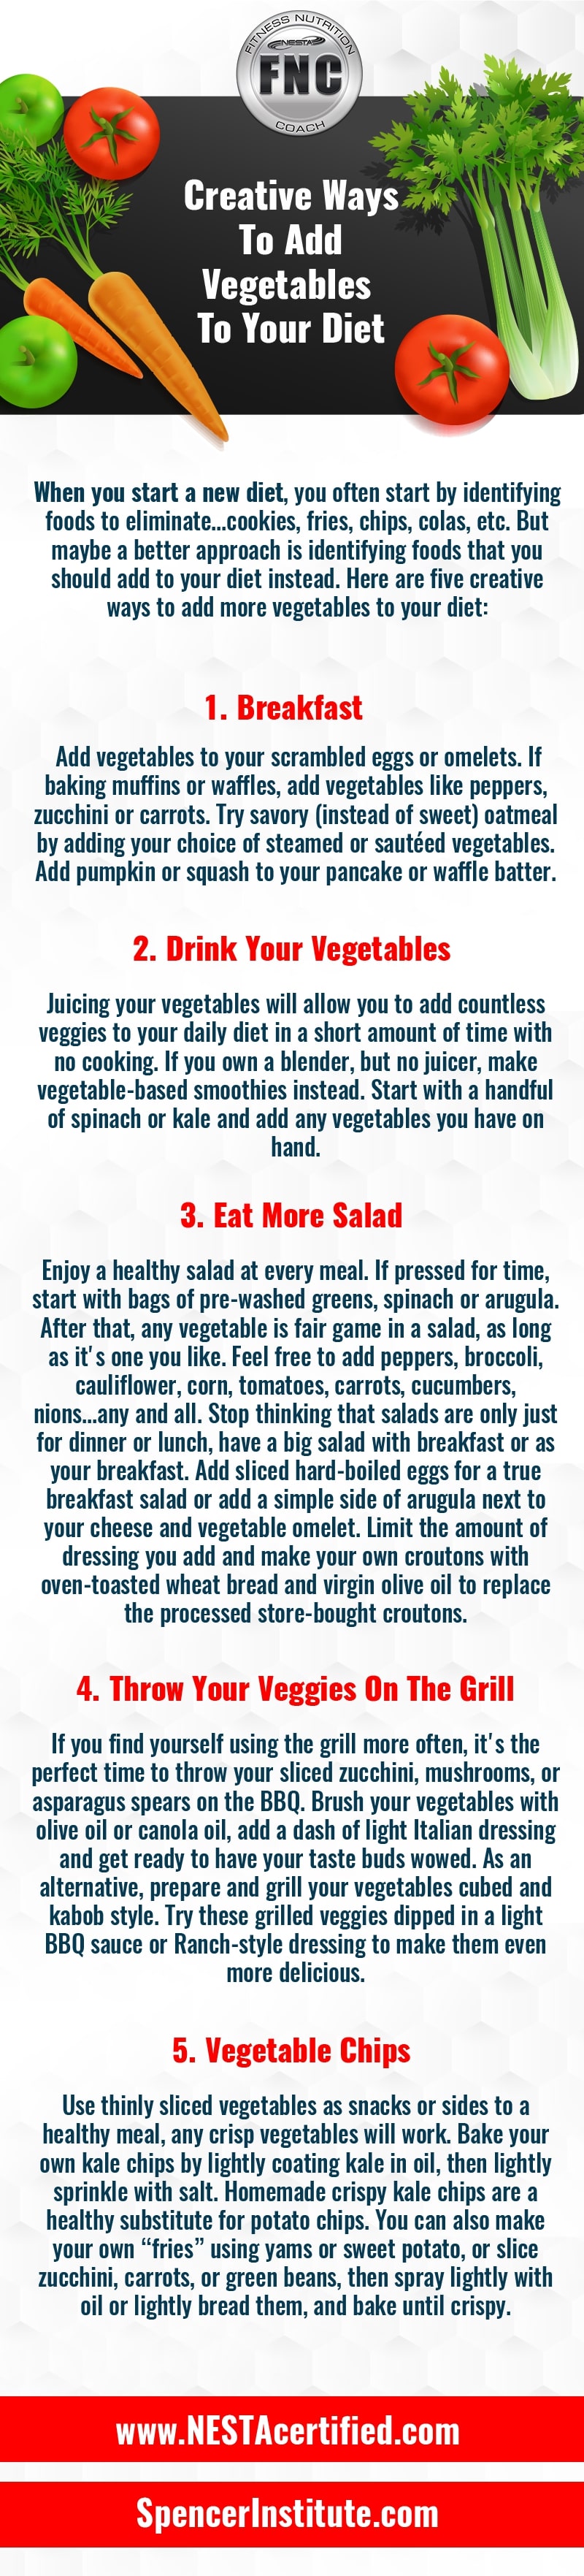 easy ways to eat more vegetables